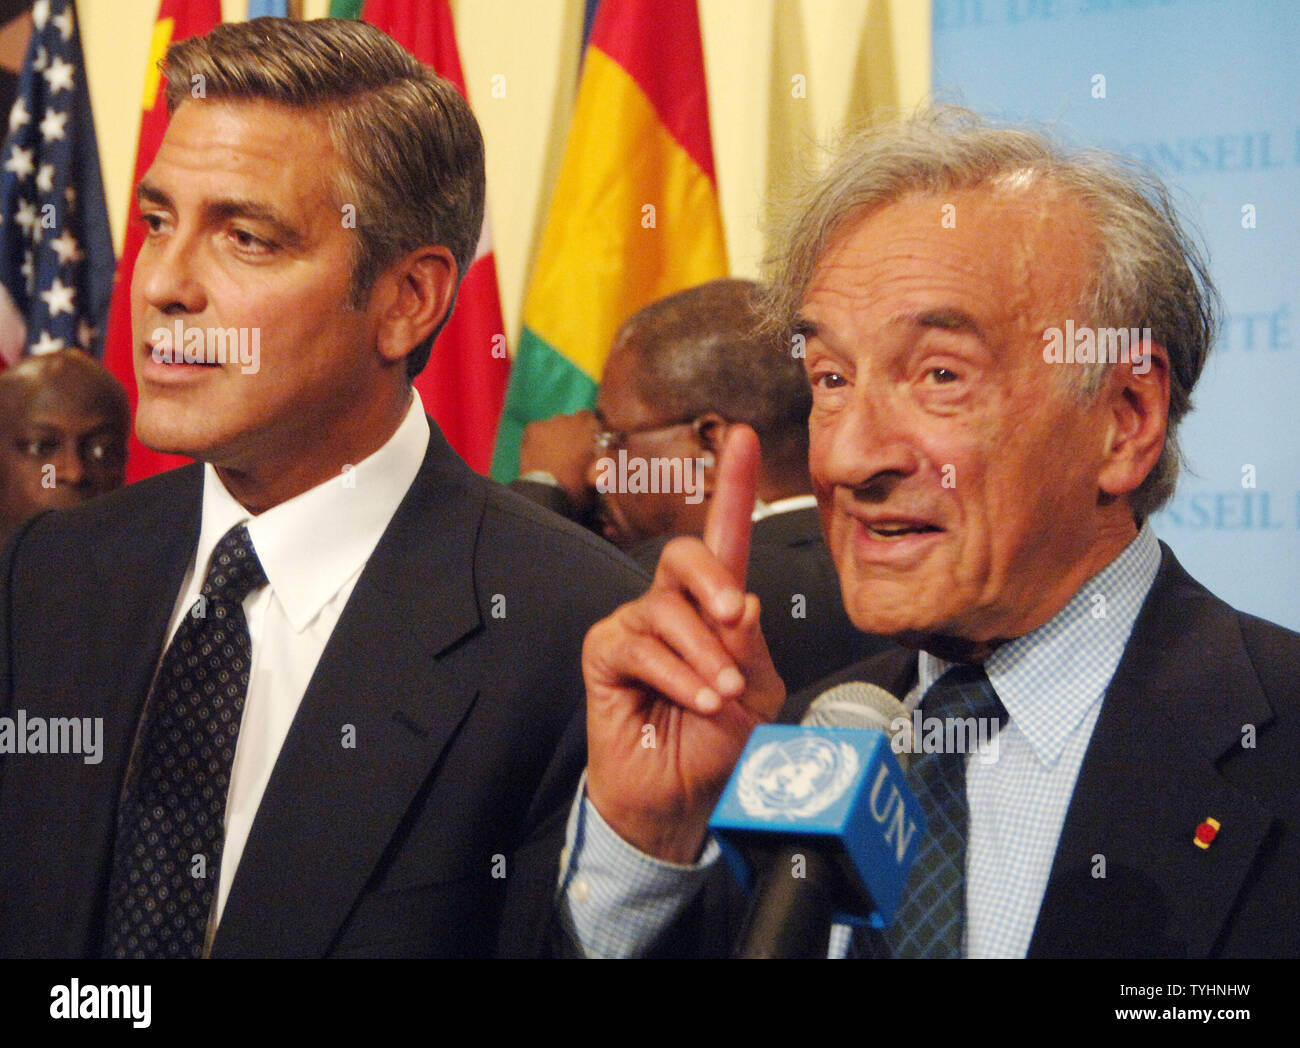 Actor/producer George Clooney and Nobel Peace Prize winner Dr. Elie Wiesel (right) meet the UN media after a 'Arria' style meeting of the United Nations Security Council members on the subject of Dafur, Sudan on September 14, 2006 in New York. The meeting was called for by the U.S. Mission to the UN and the Elie Wiesel Foundation.   (UPI Photo/Ezio Petersen) Stock Photo